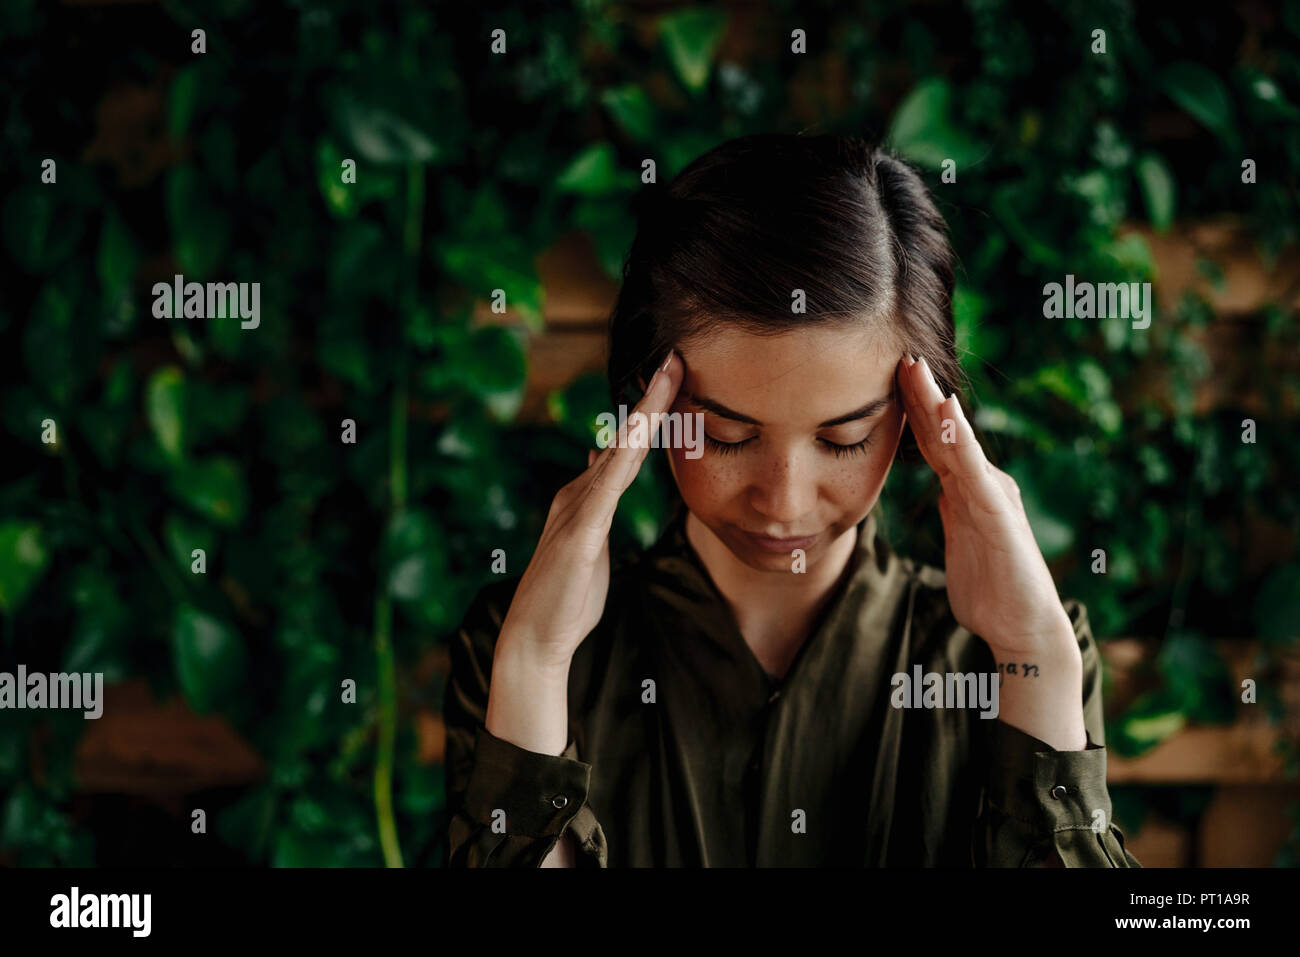 Focused young woman at wall with climbing plants Stock Photo